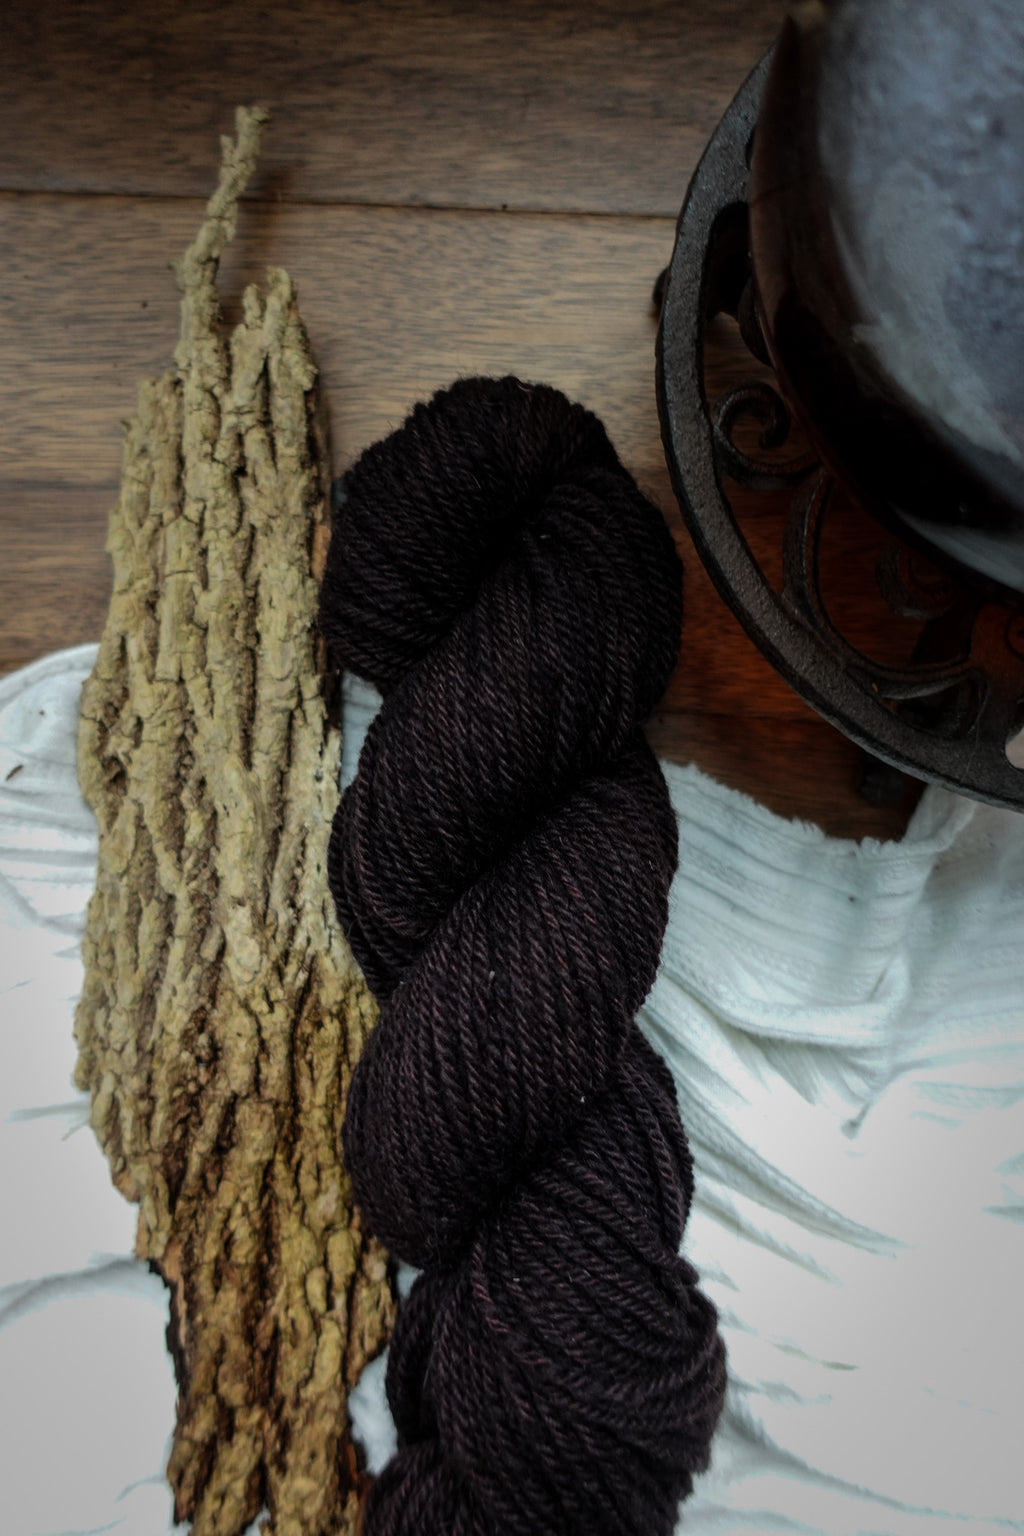 A skein of yarn, naturally dyed a dark burgundy, lays on a tabletop next to a strip of bark and a teapot.